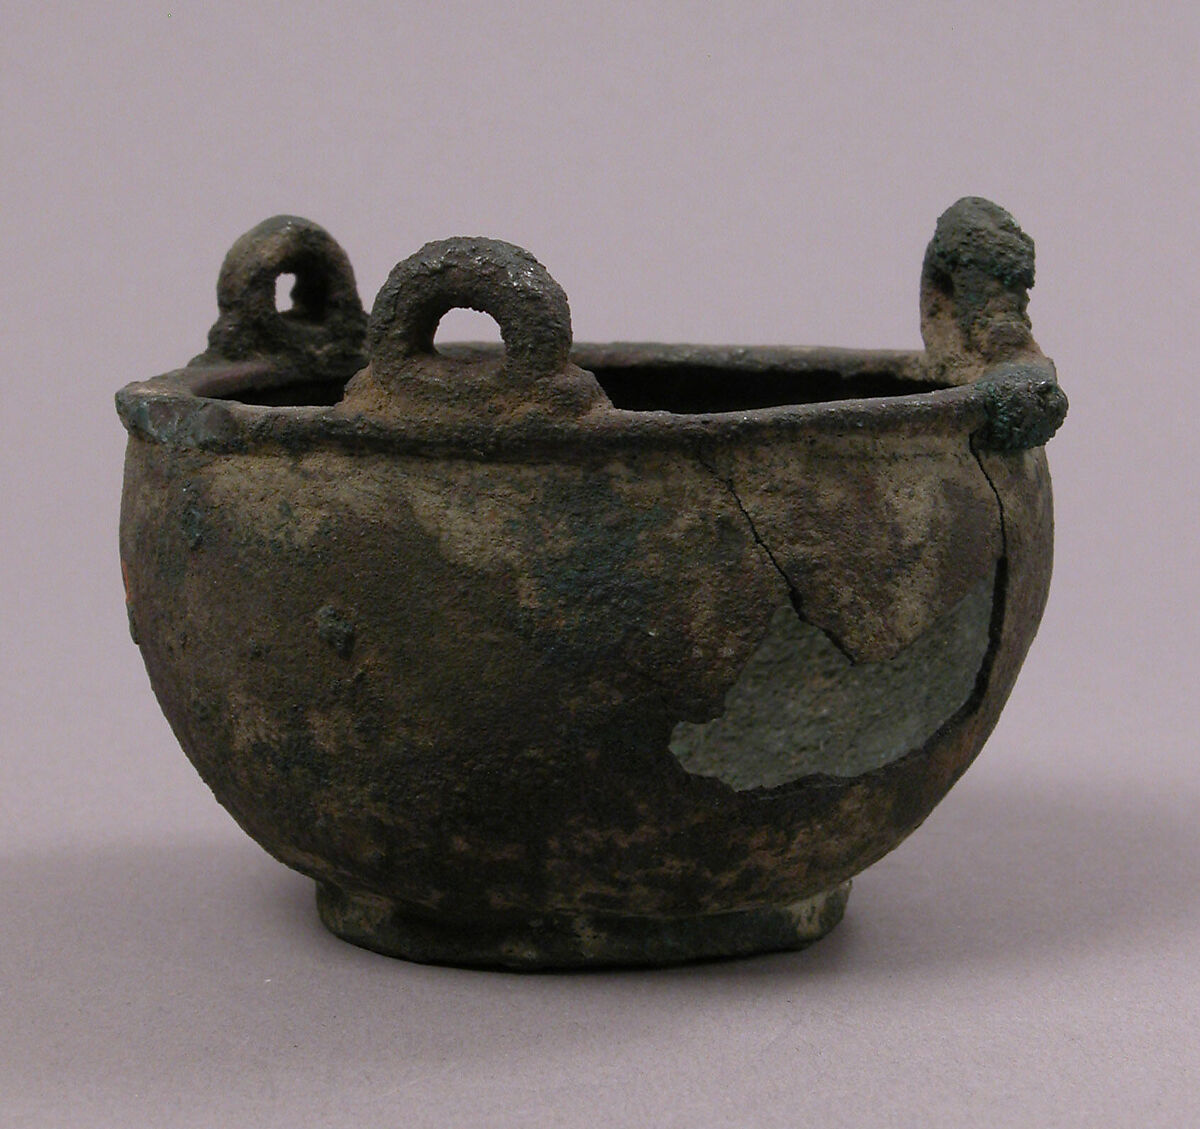 Censer, Copper alloy, Early Medieval (?) 